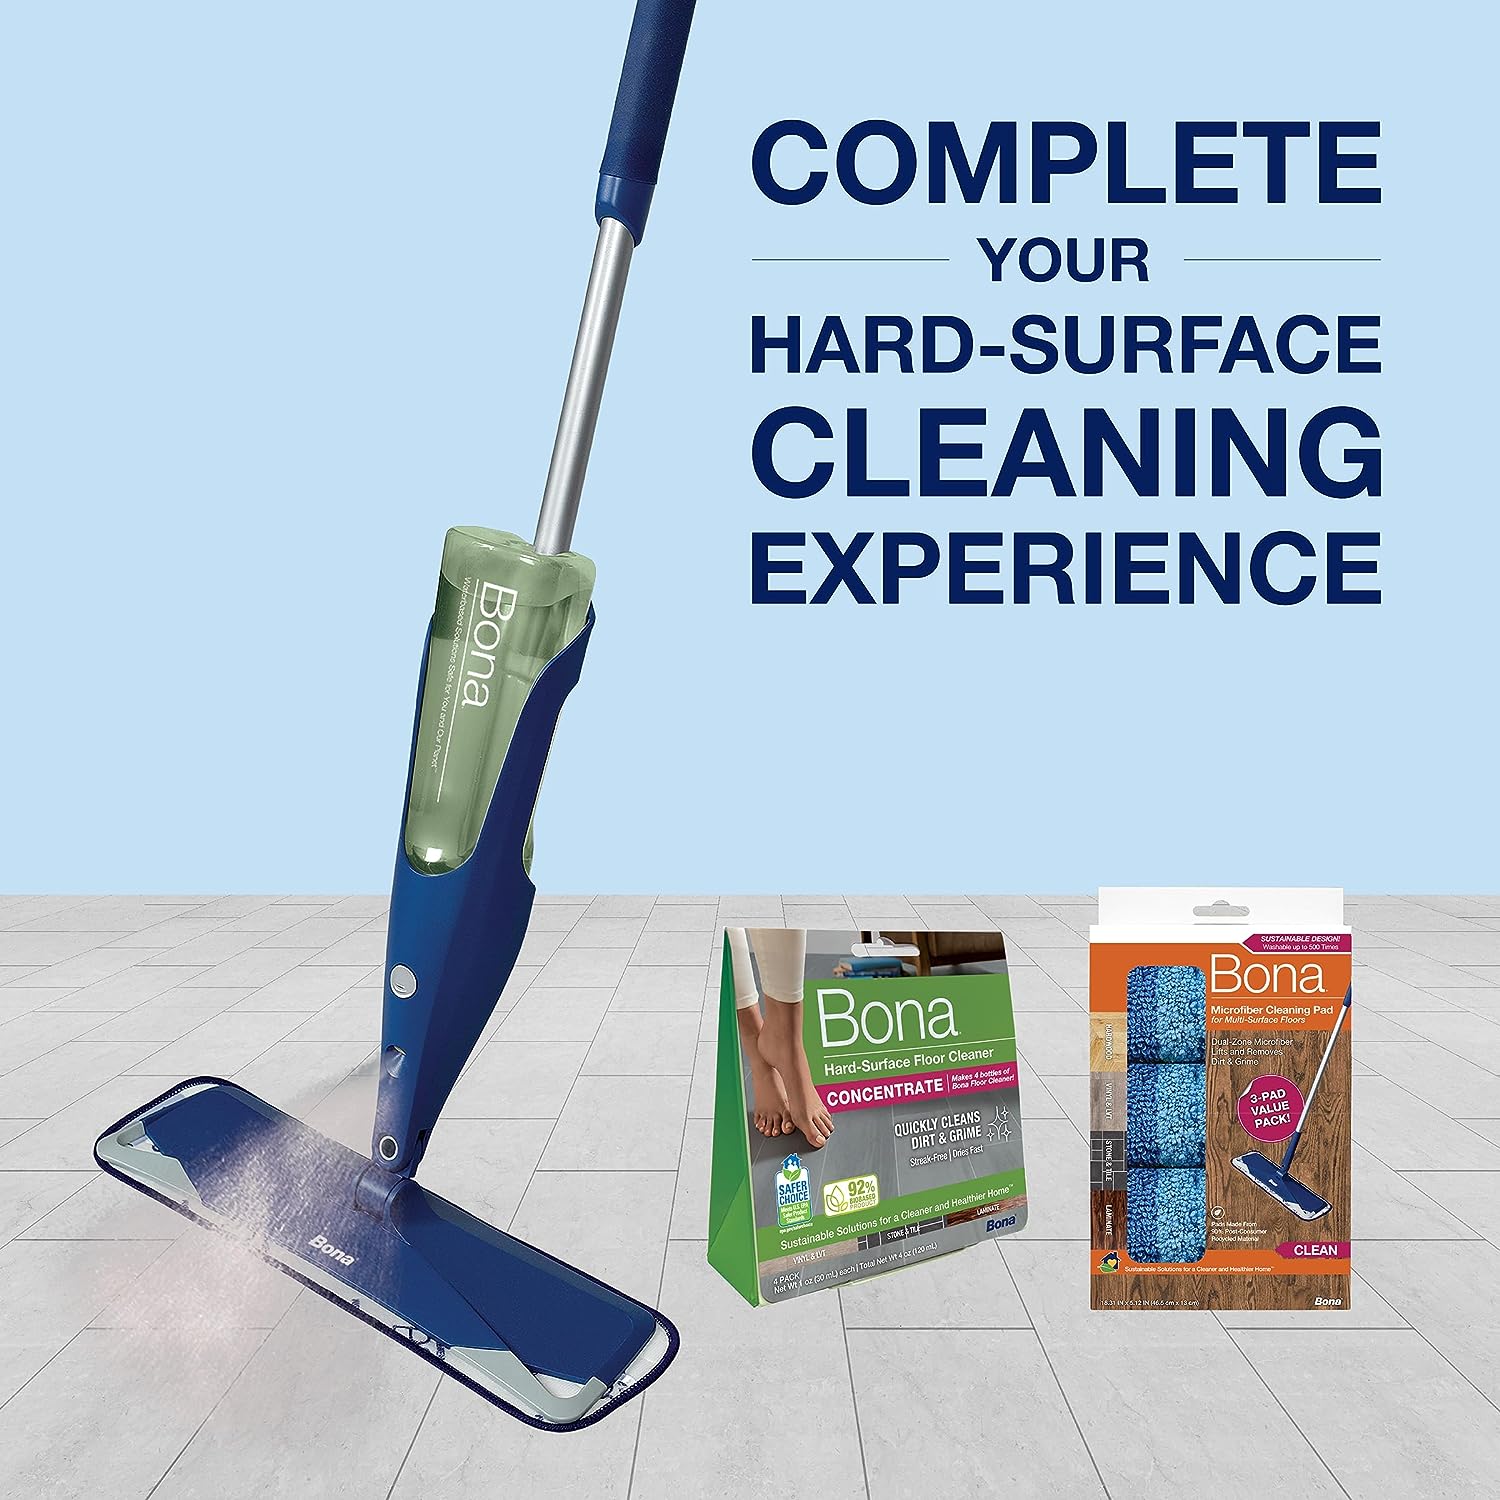 Bona Multi-Surface Floor Premium Spray Mop - Includes Multi-Surface Floor Cleaner Concentrate and Machine Washable Microfiber Cleaning Pad - For Stone, Tile, Laminate and Vinyl LVT/LVP Floors : Health & Household